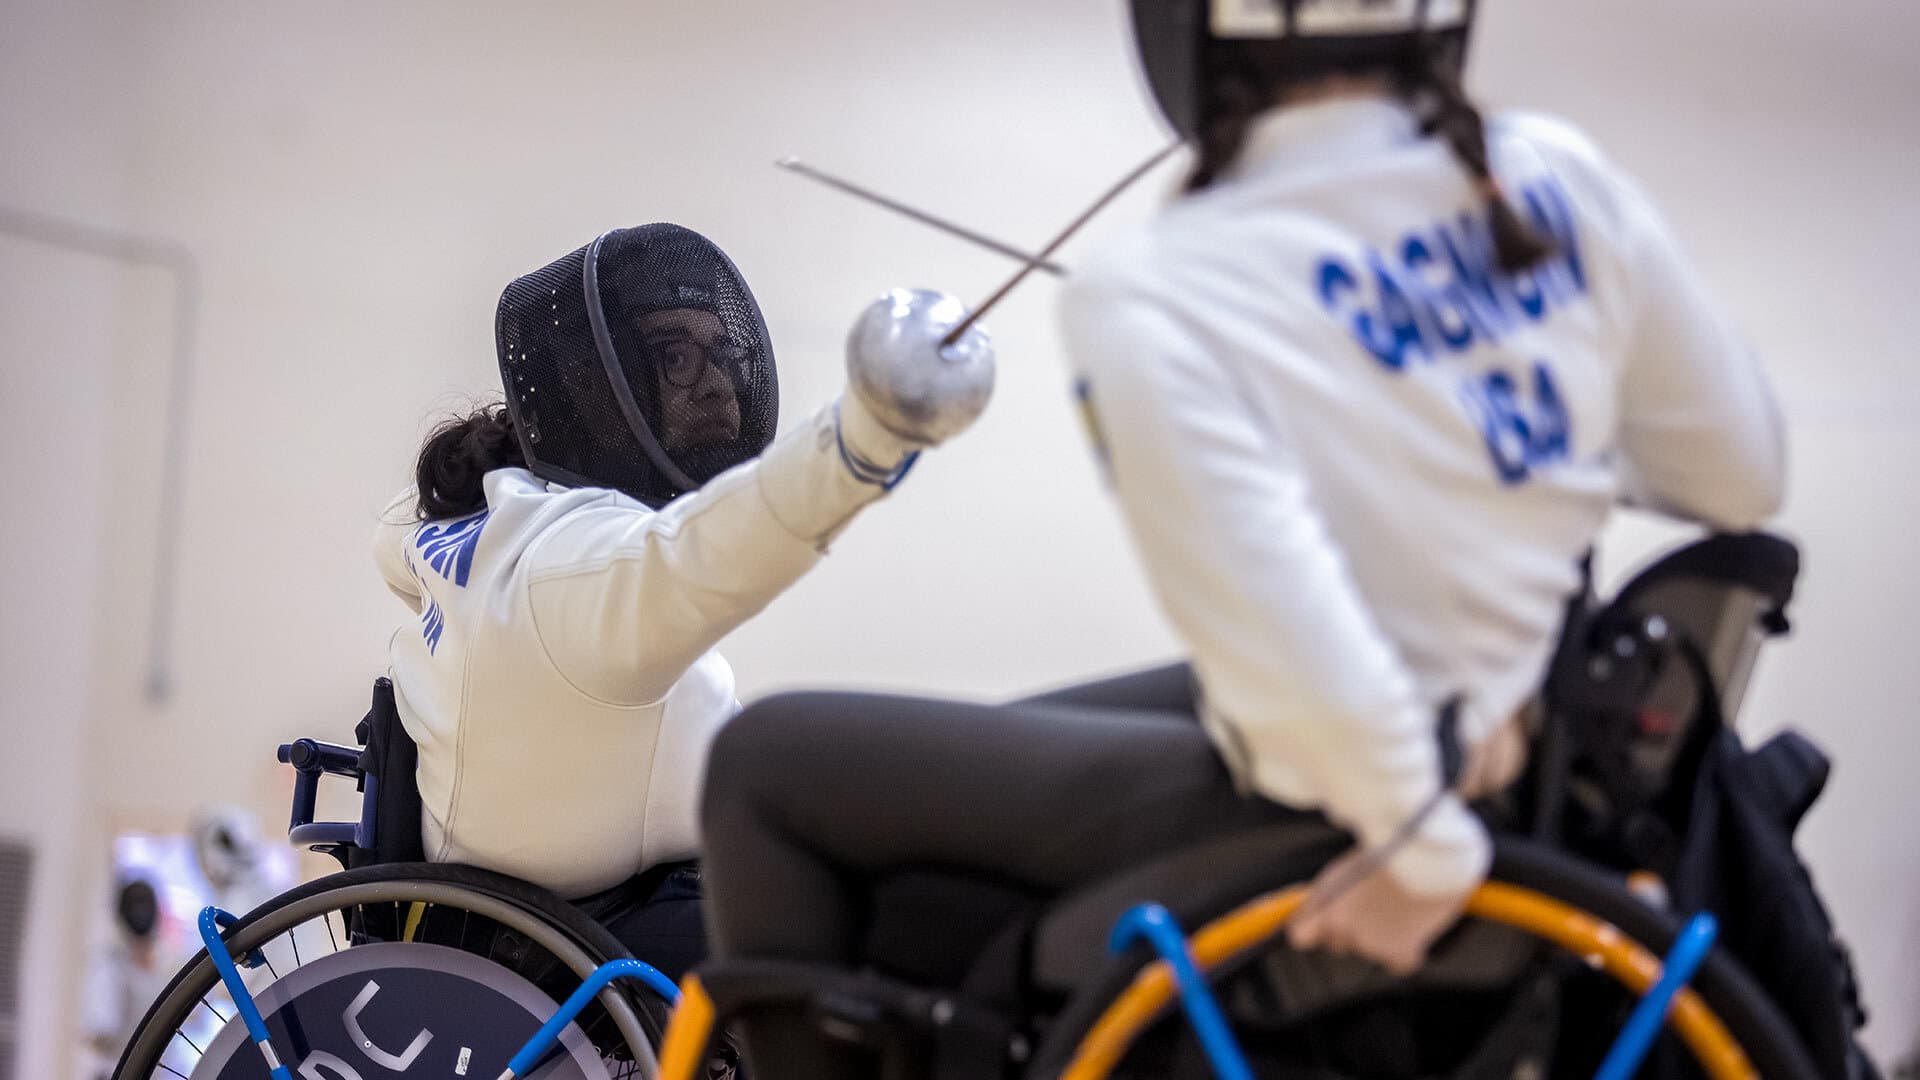 Two fencers in wheelchairs fence